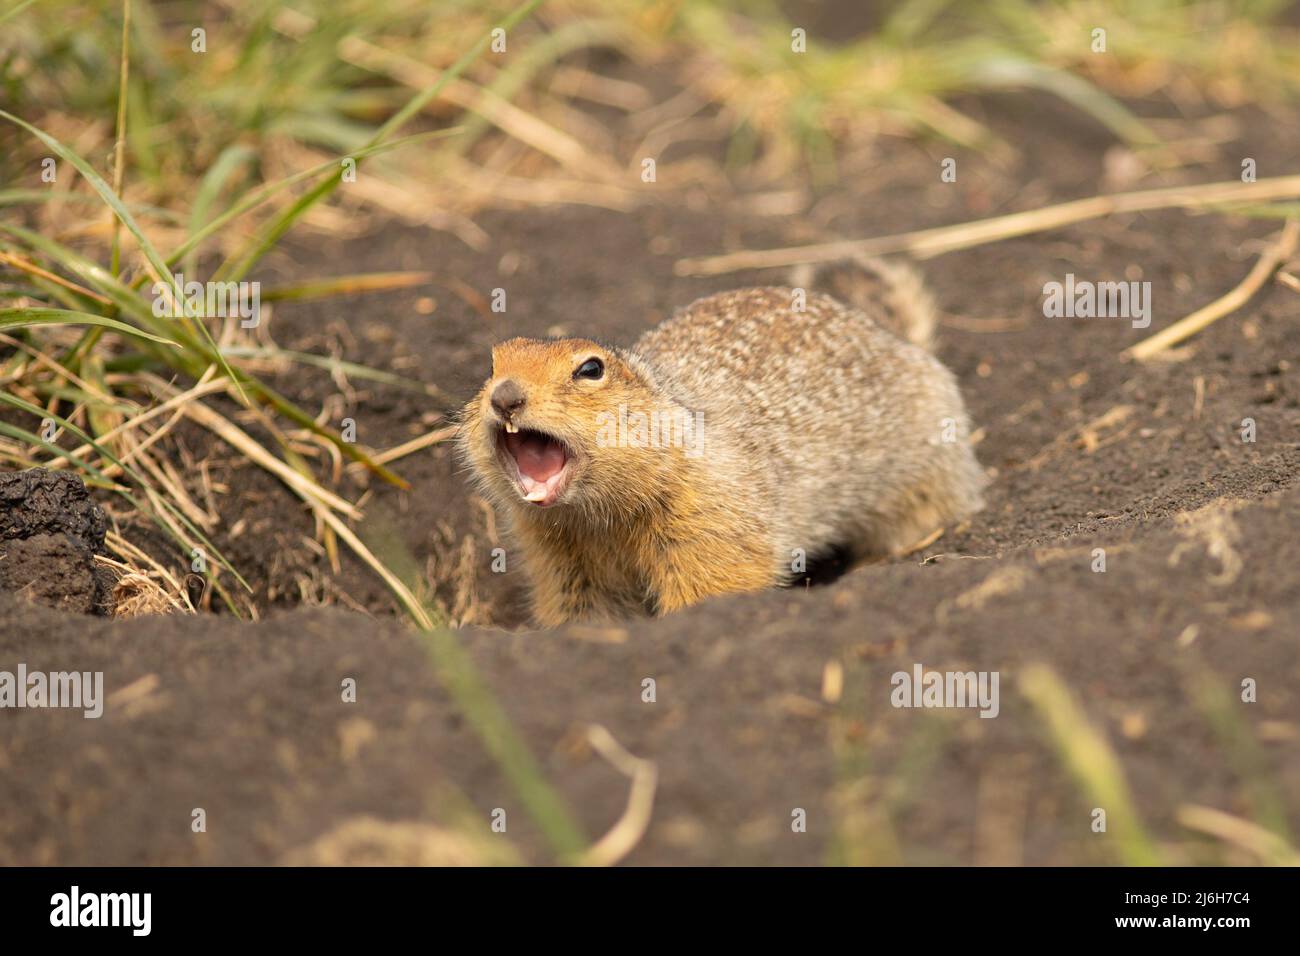 Screaming Arctic ground squirrel or parka in Kamchatka near Tolbachik volcano, Russia Stock Photo